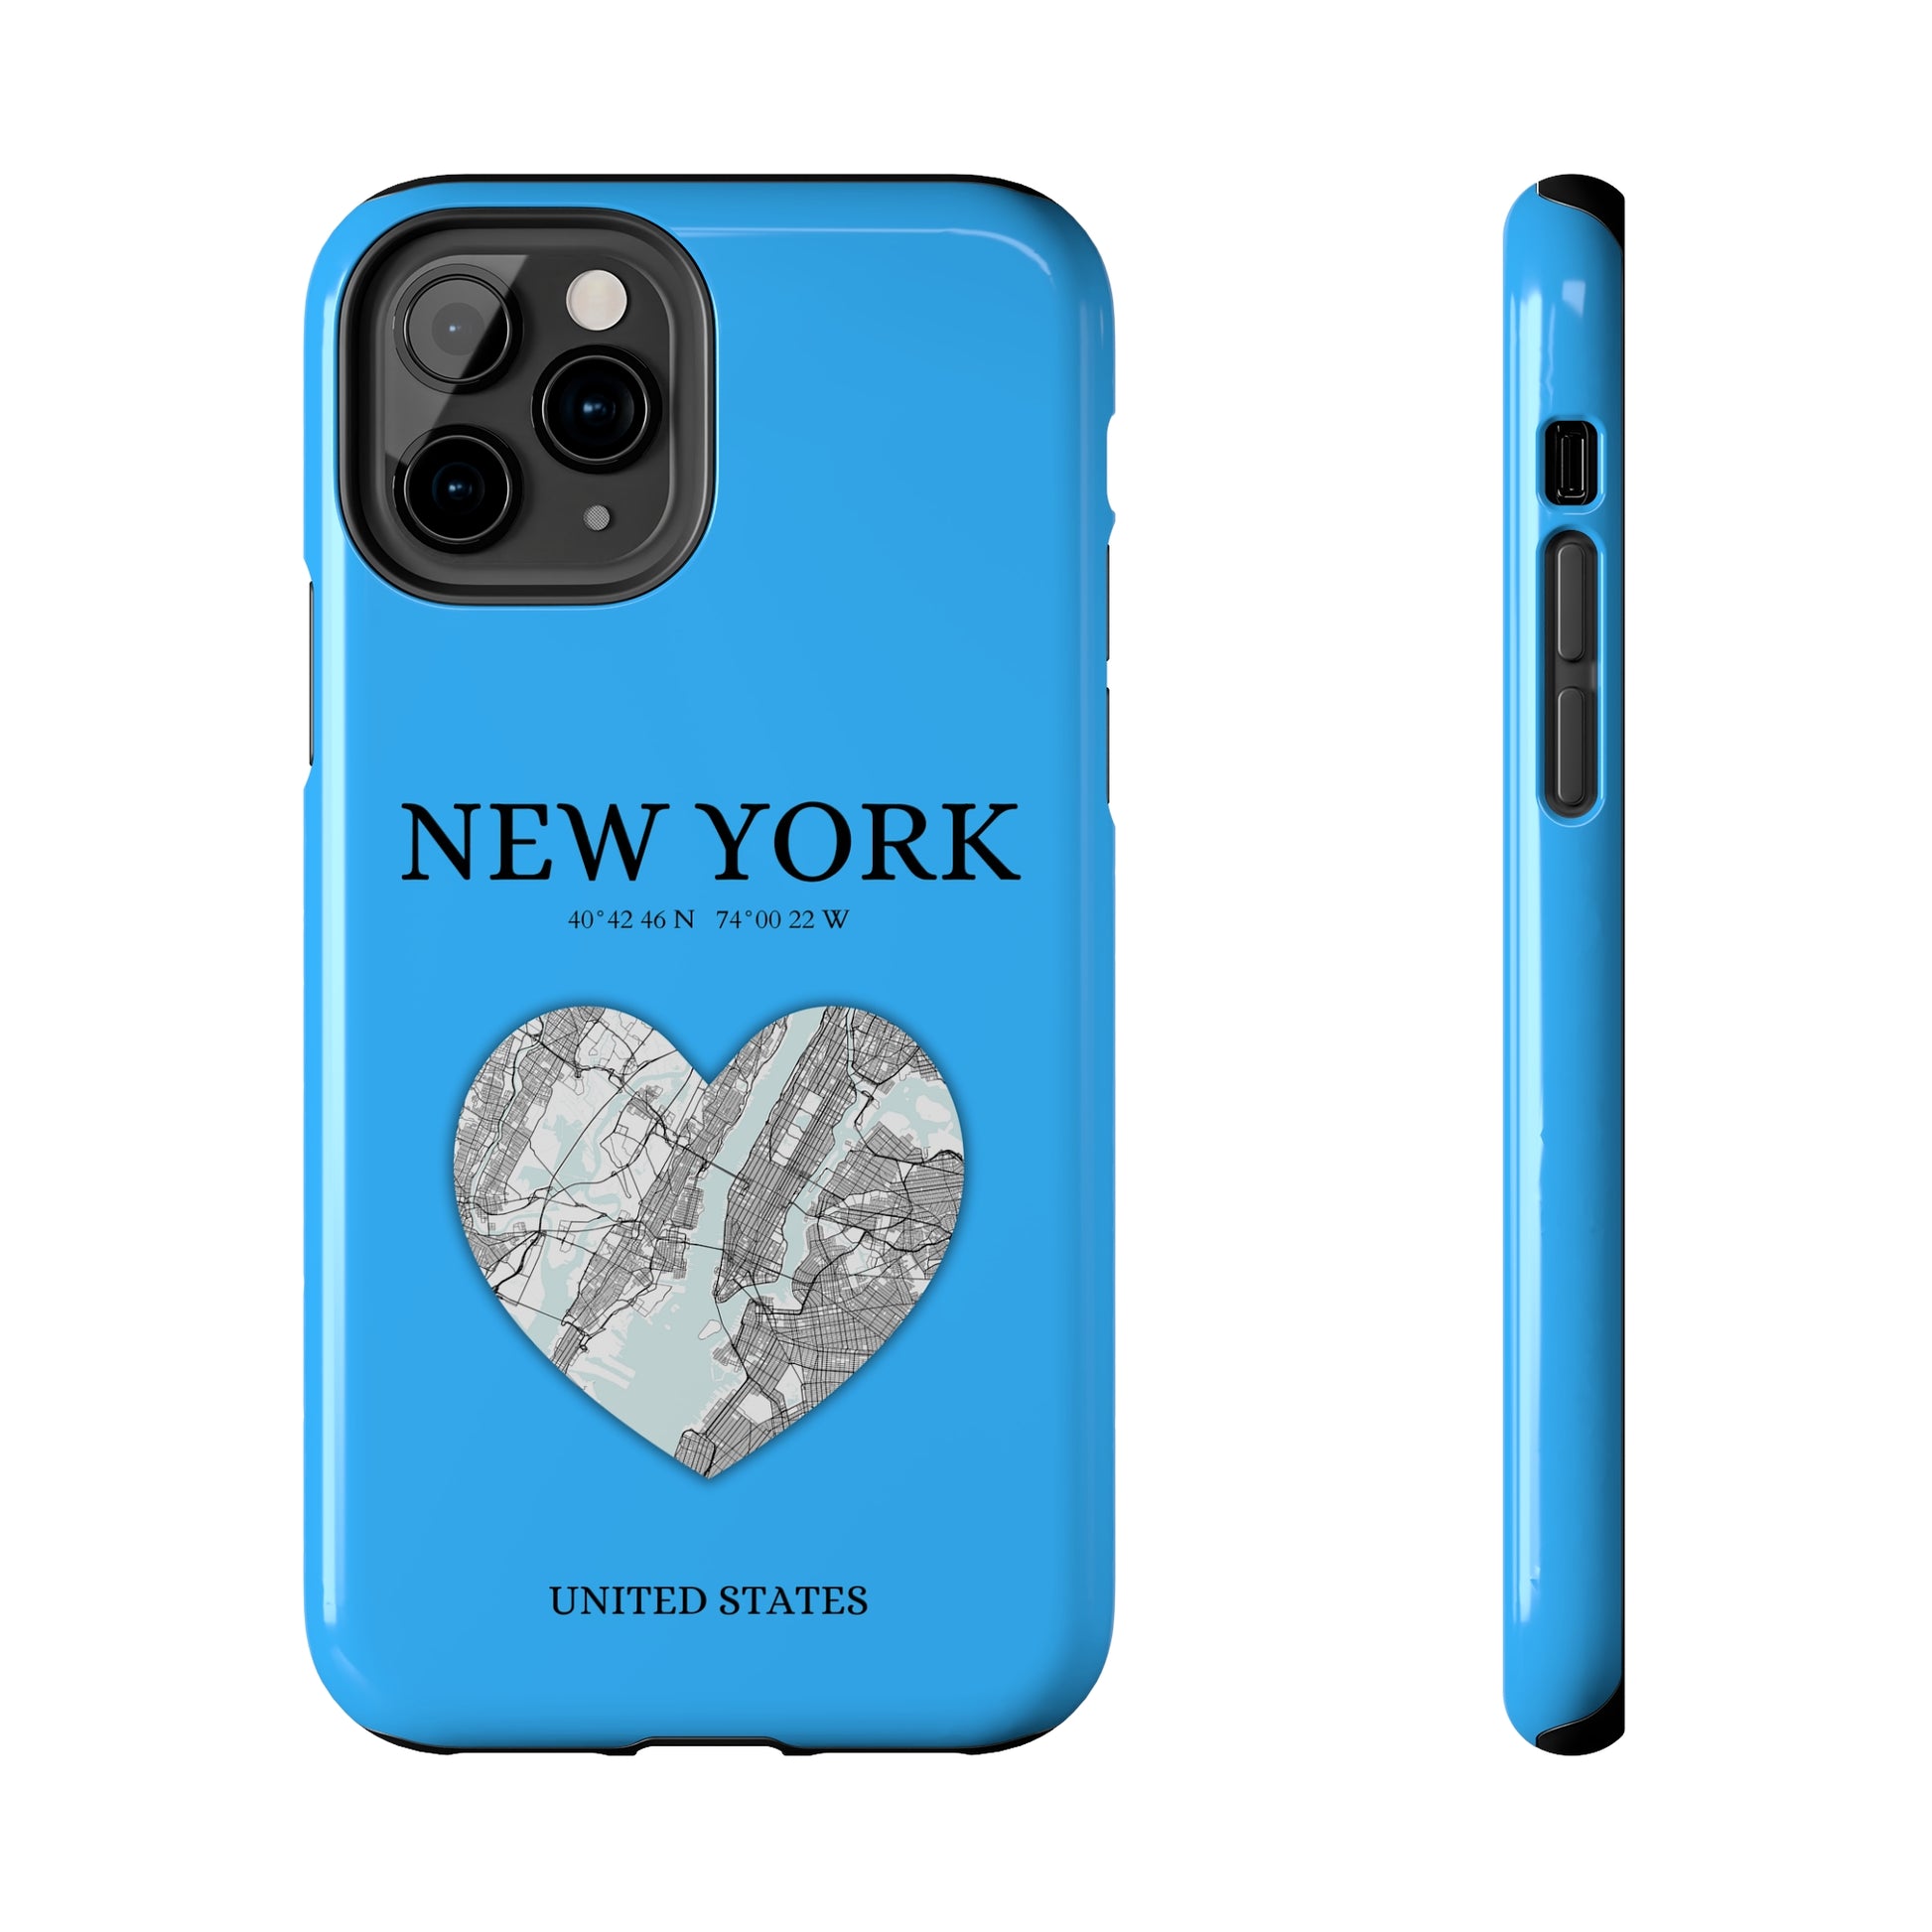 Secure your iPhone 11-15 with RIMA's durable case: Polycarbonate shell, rubber lining for shock absorption, and supports wireless charging-York Heartbeat - Sky Blue (iPhone Case 11-15)